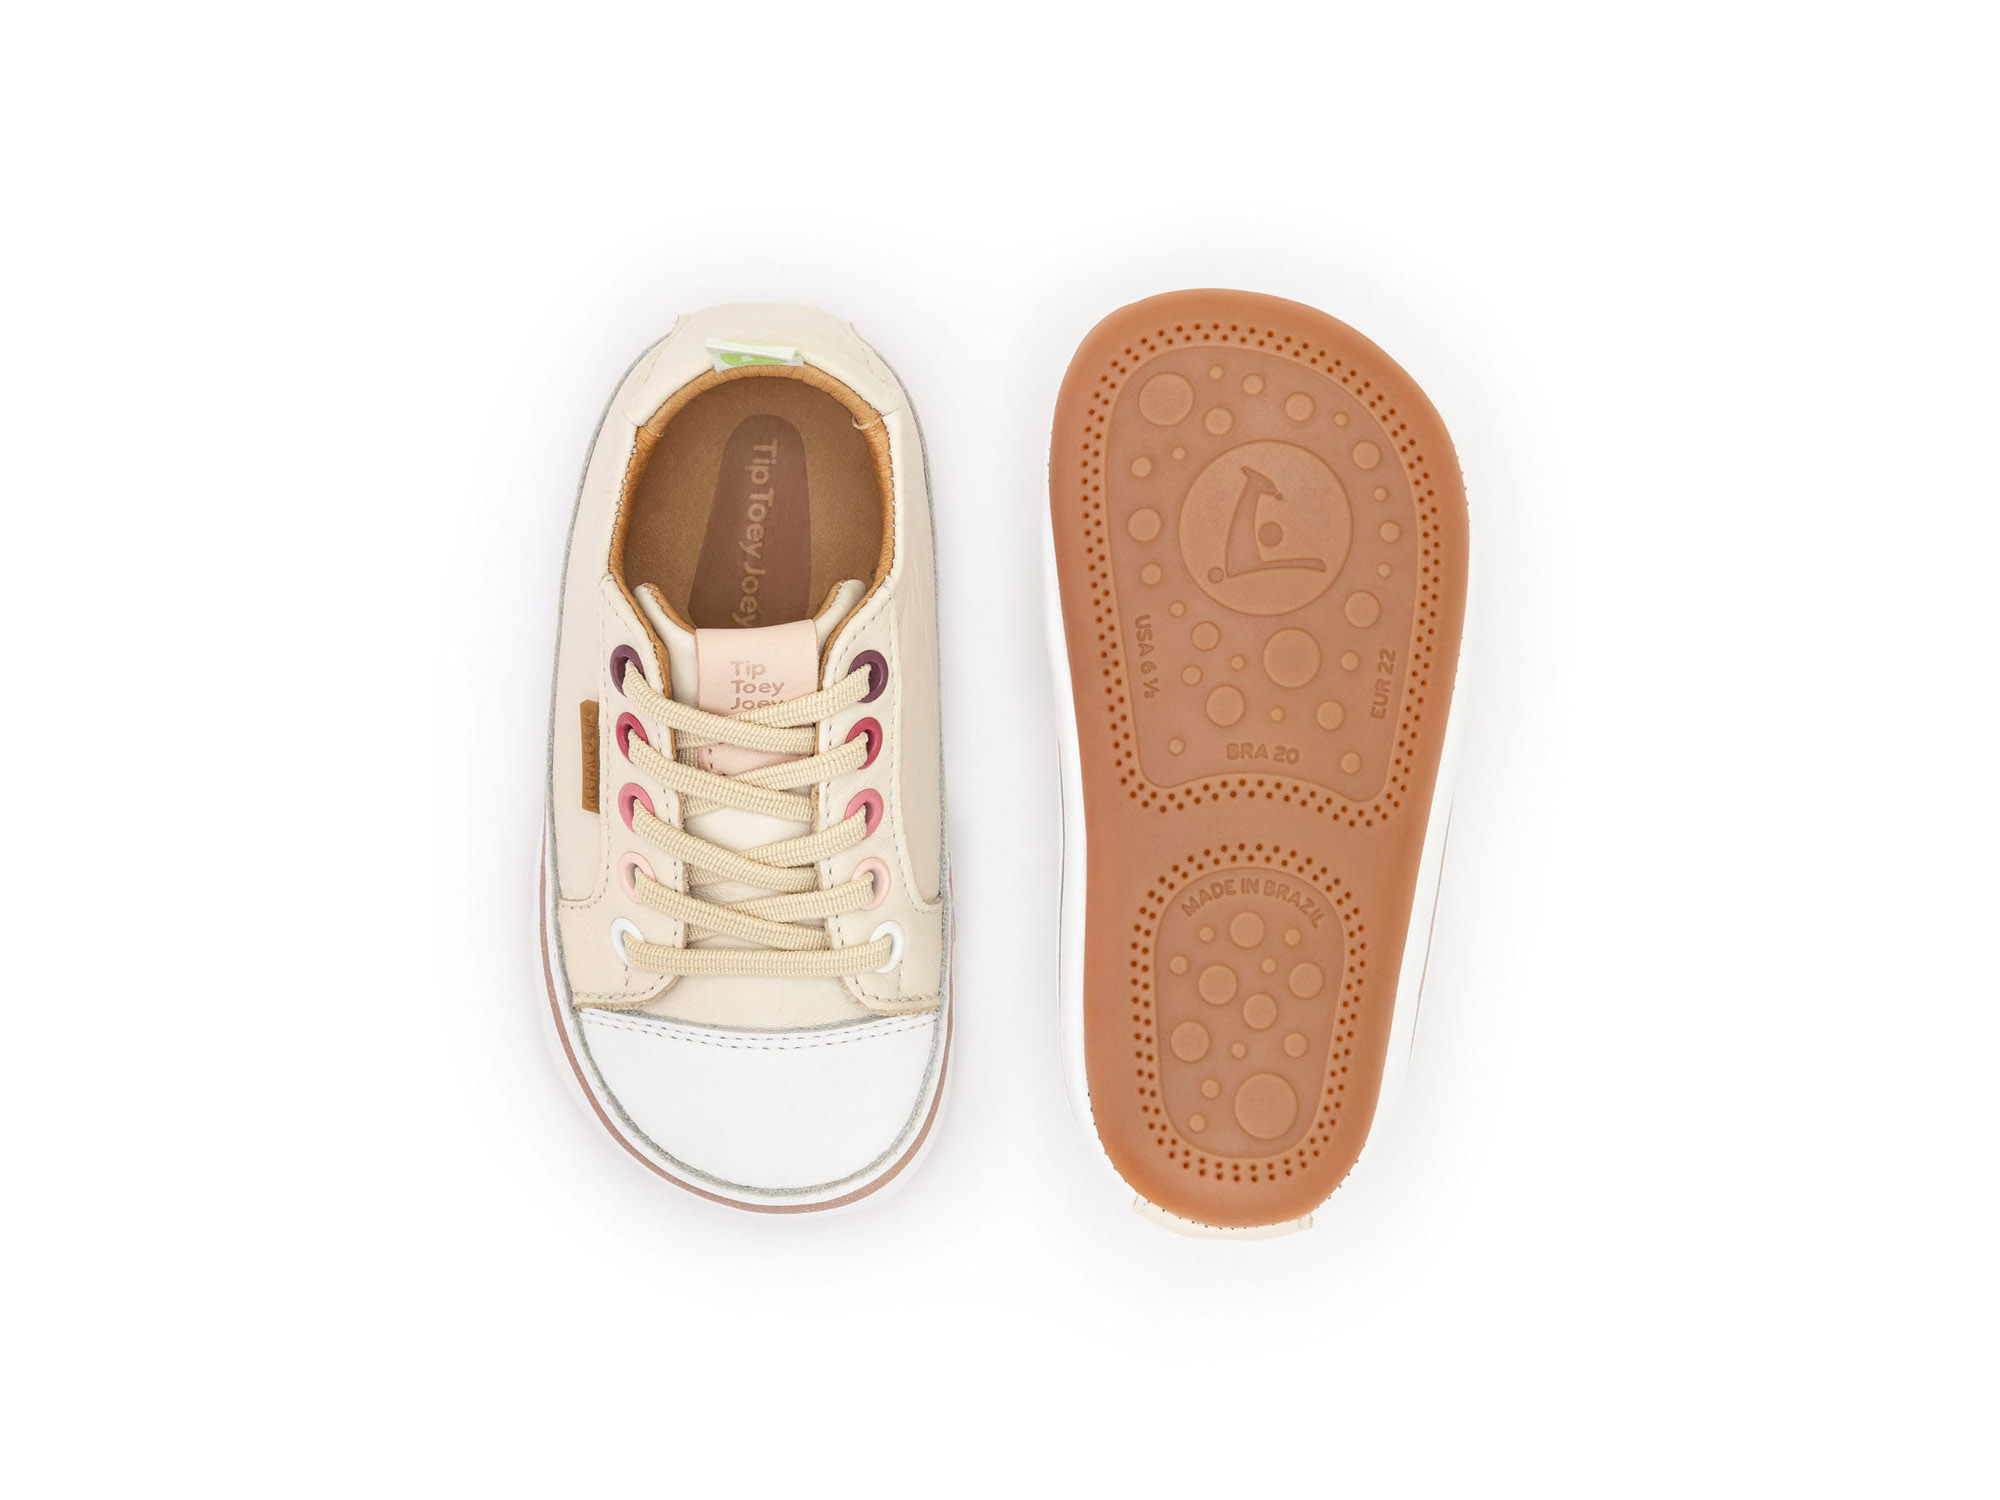 UP & GO Sneakers for Girls Funky Colors | Tip Toey Joey - Australia - 2